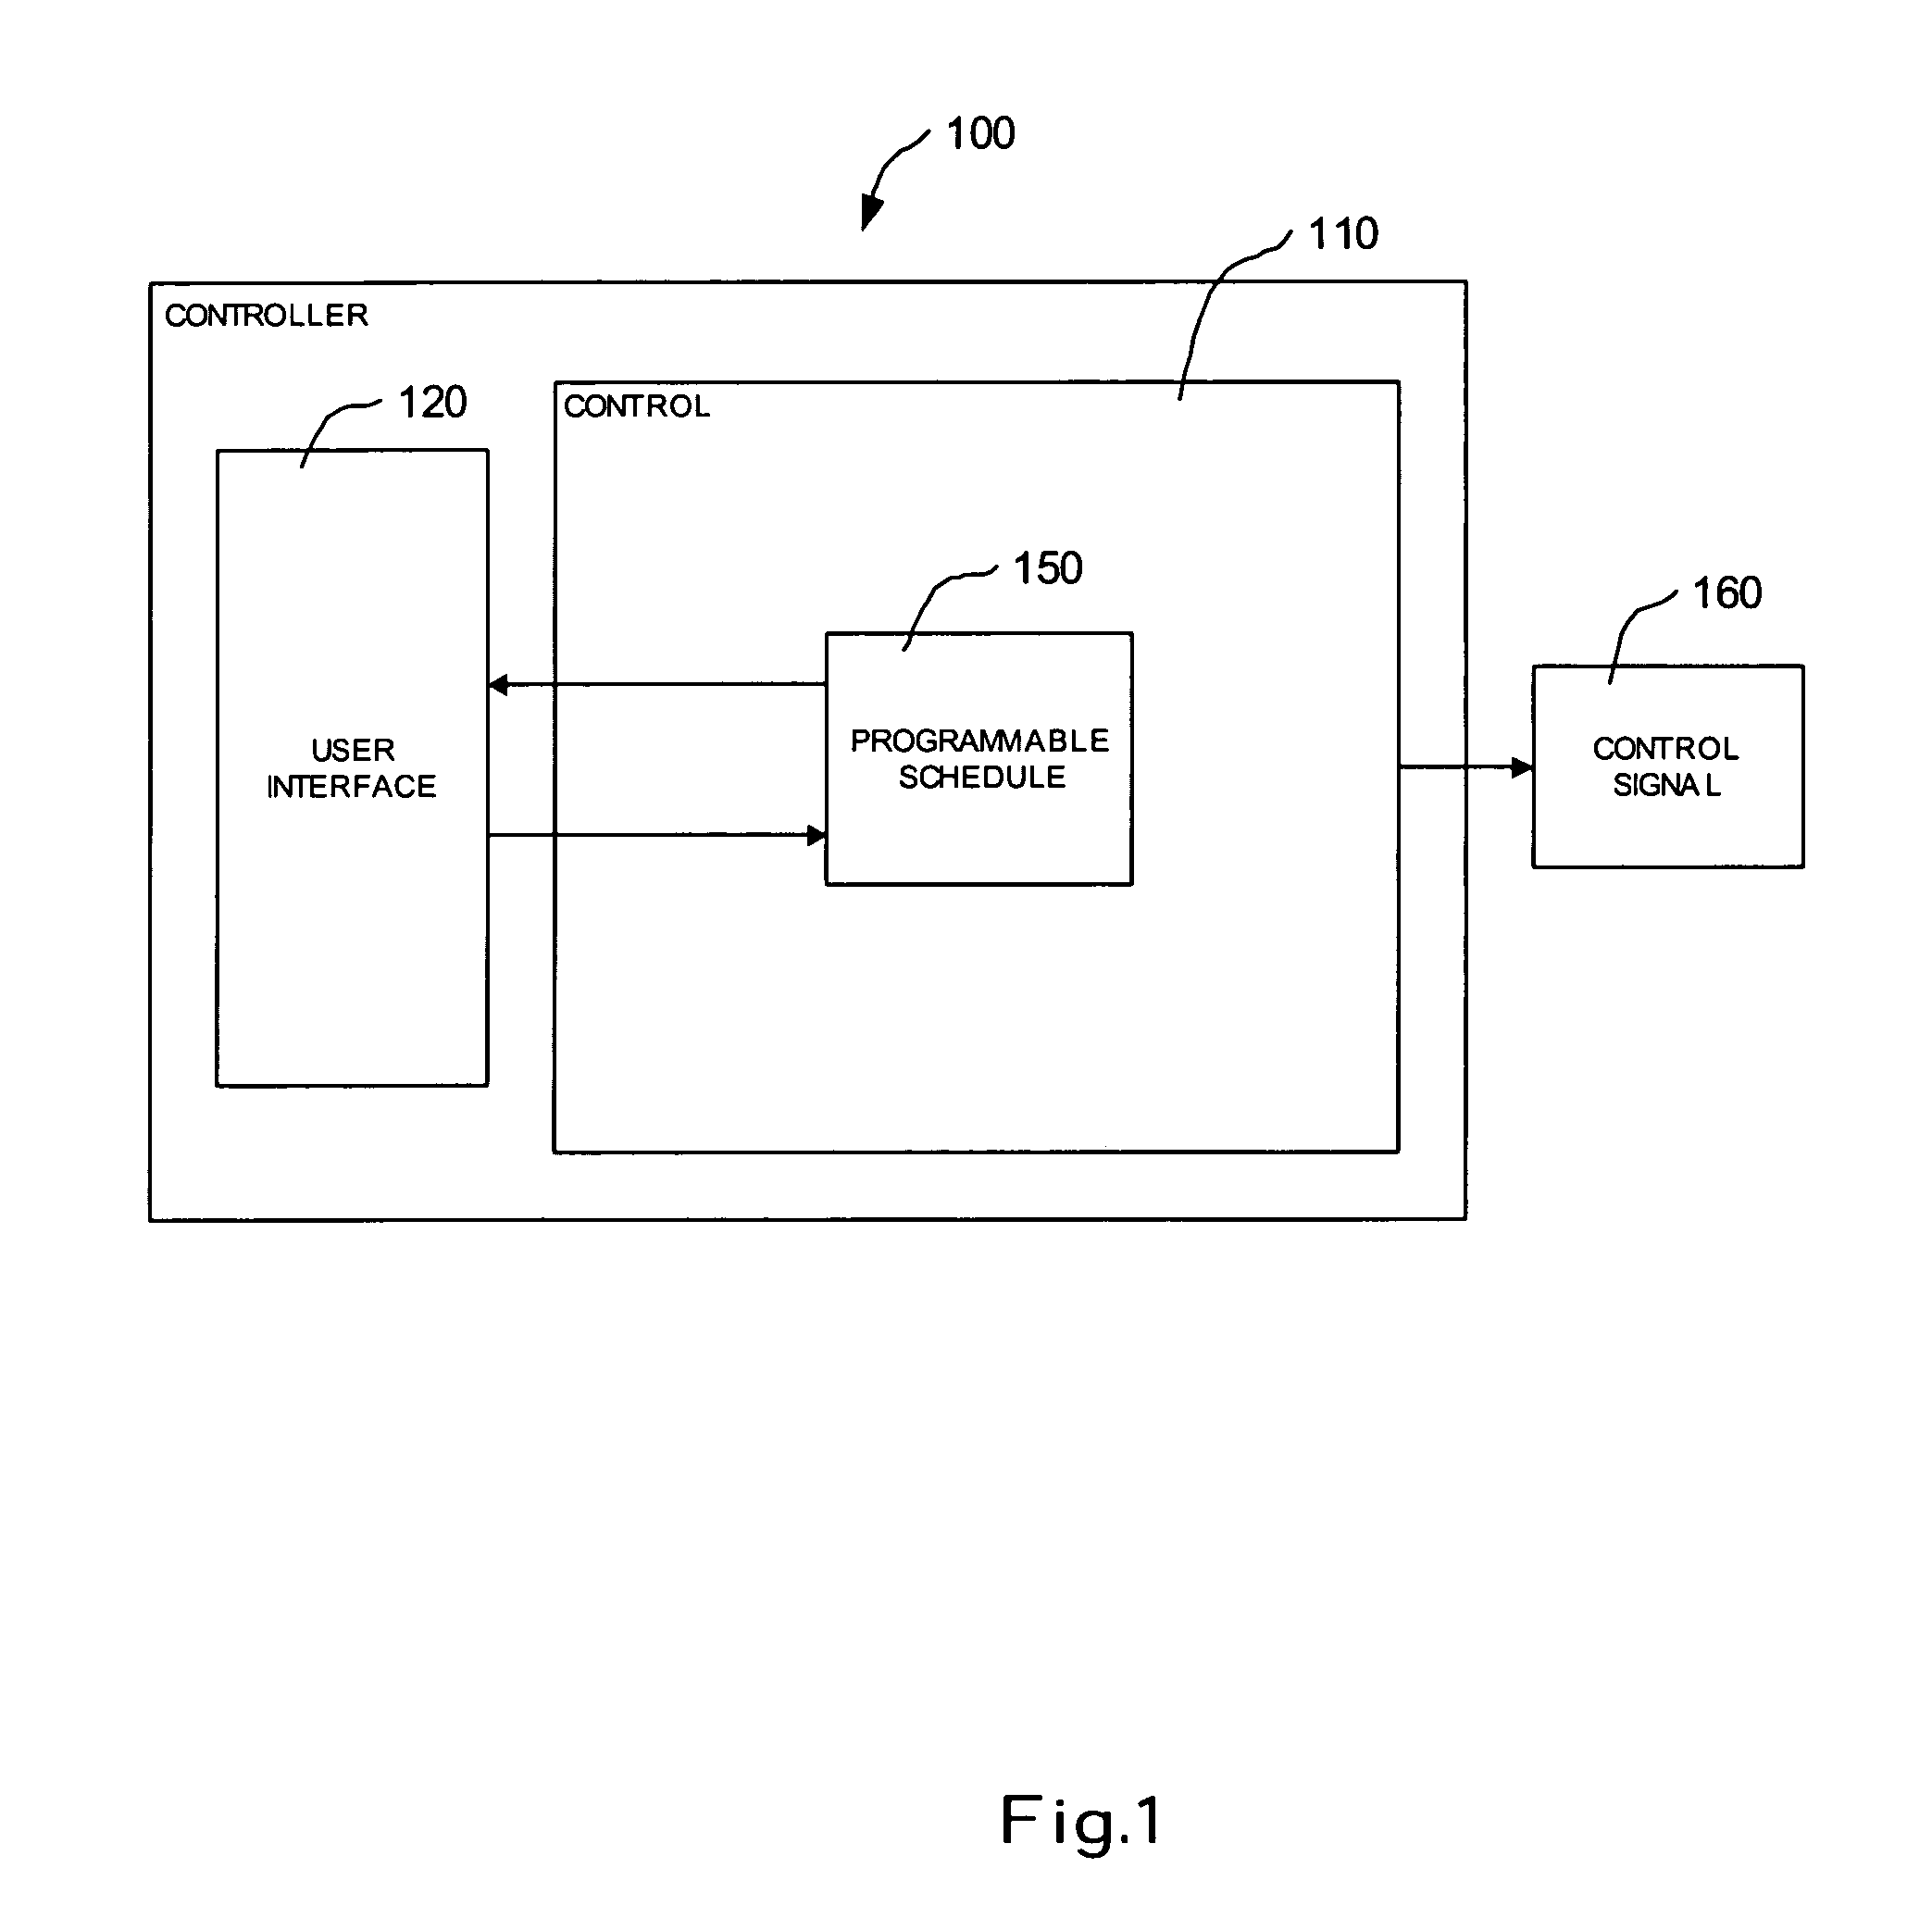 Controller interface with dynamic schedule display